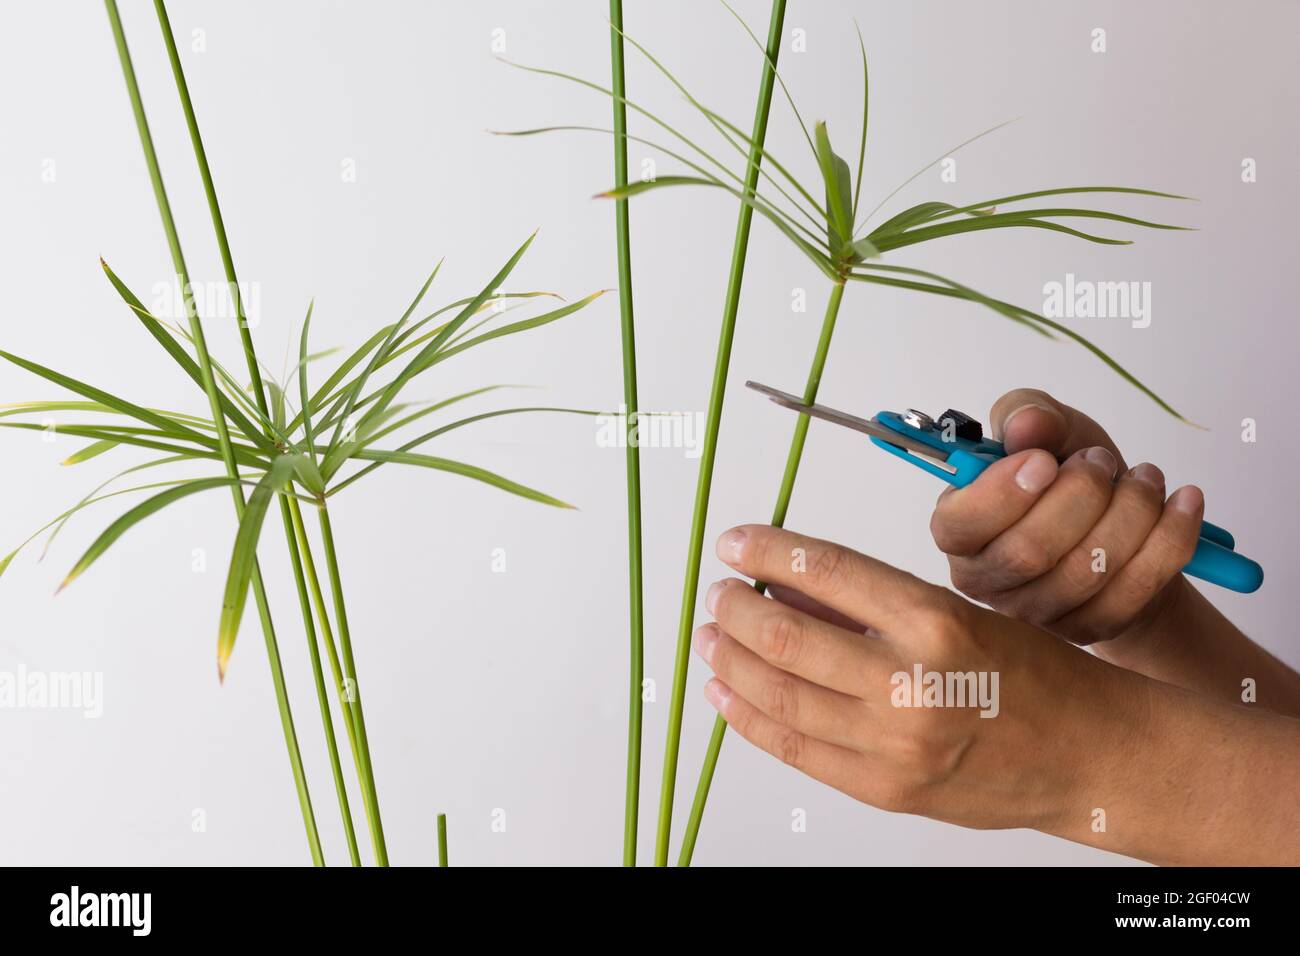 Woman hands cutting umbrella of Cyperus plant for rooting using secateurs on white background Stock Photo